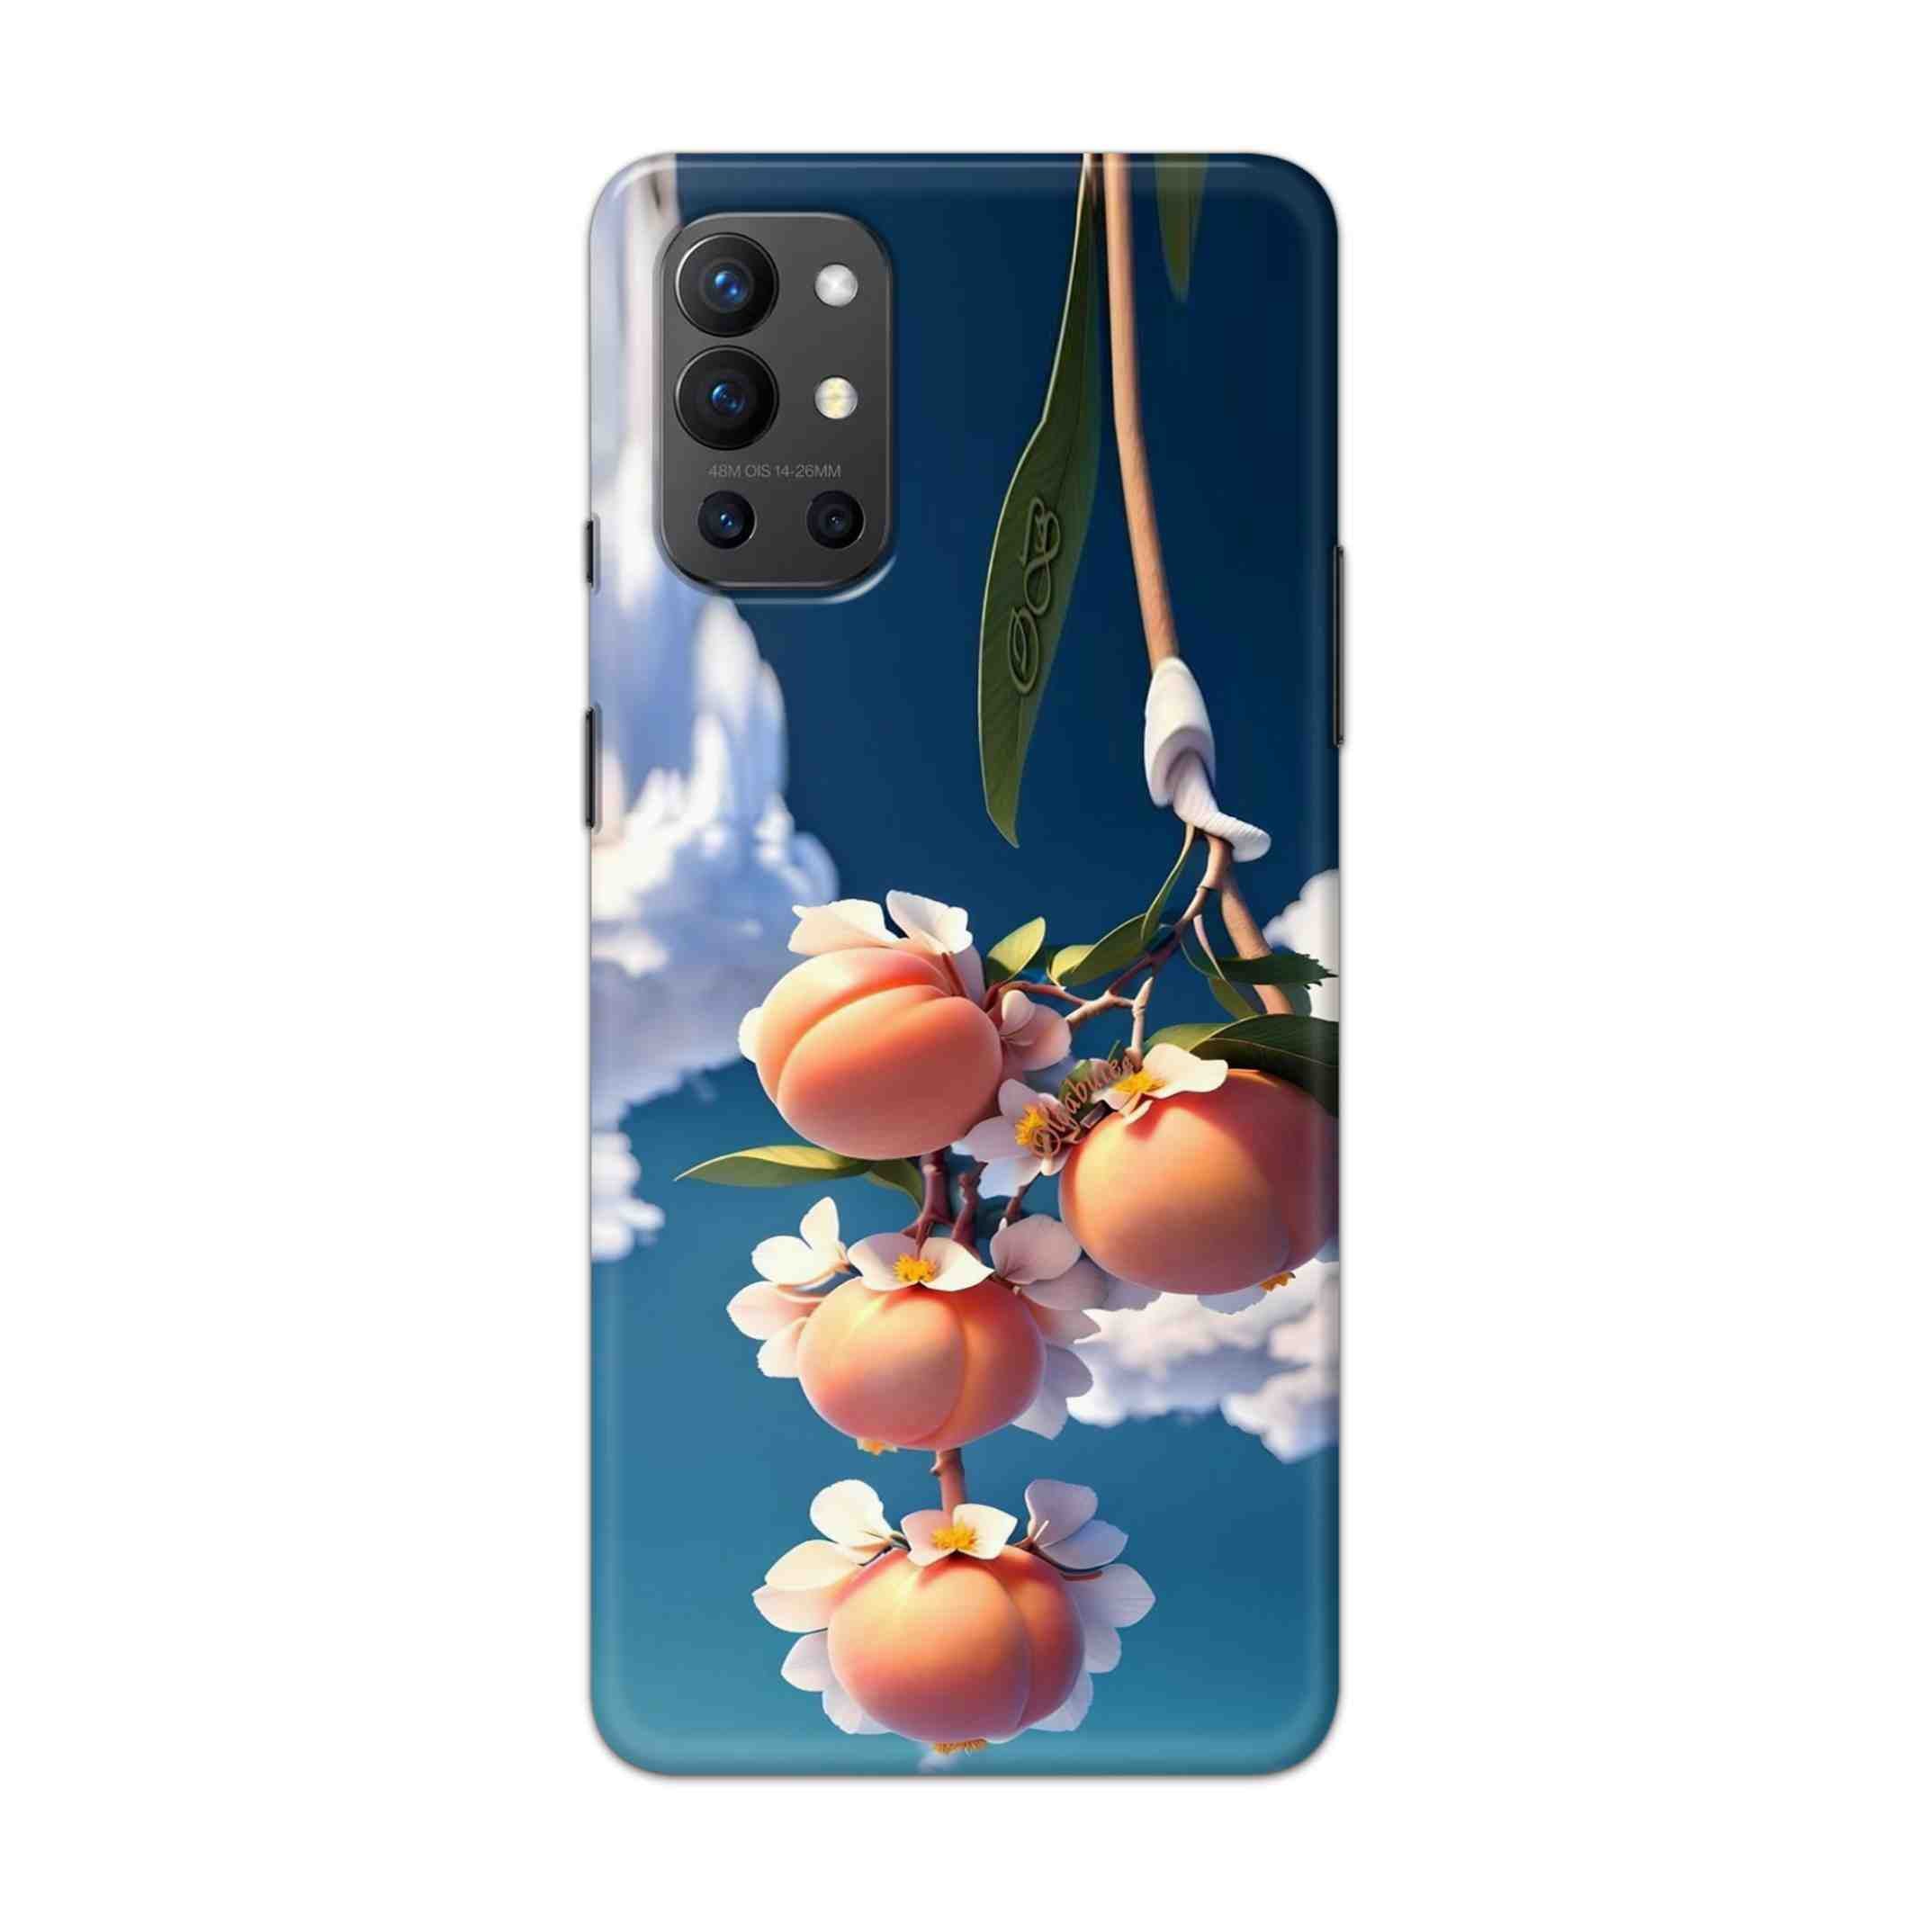 Buy Fruit Hard Back Mobile Phone Case Cover For OnePlus 9R / 8T Online